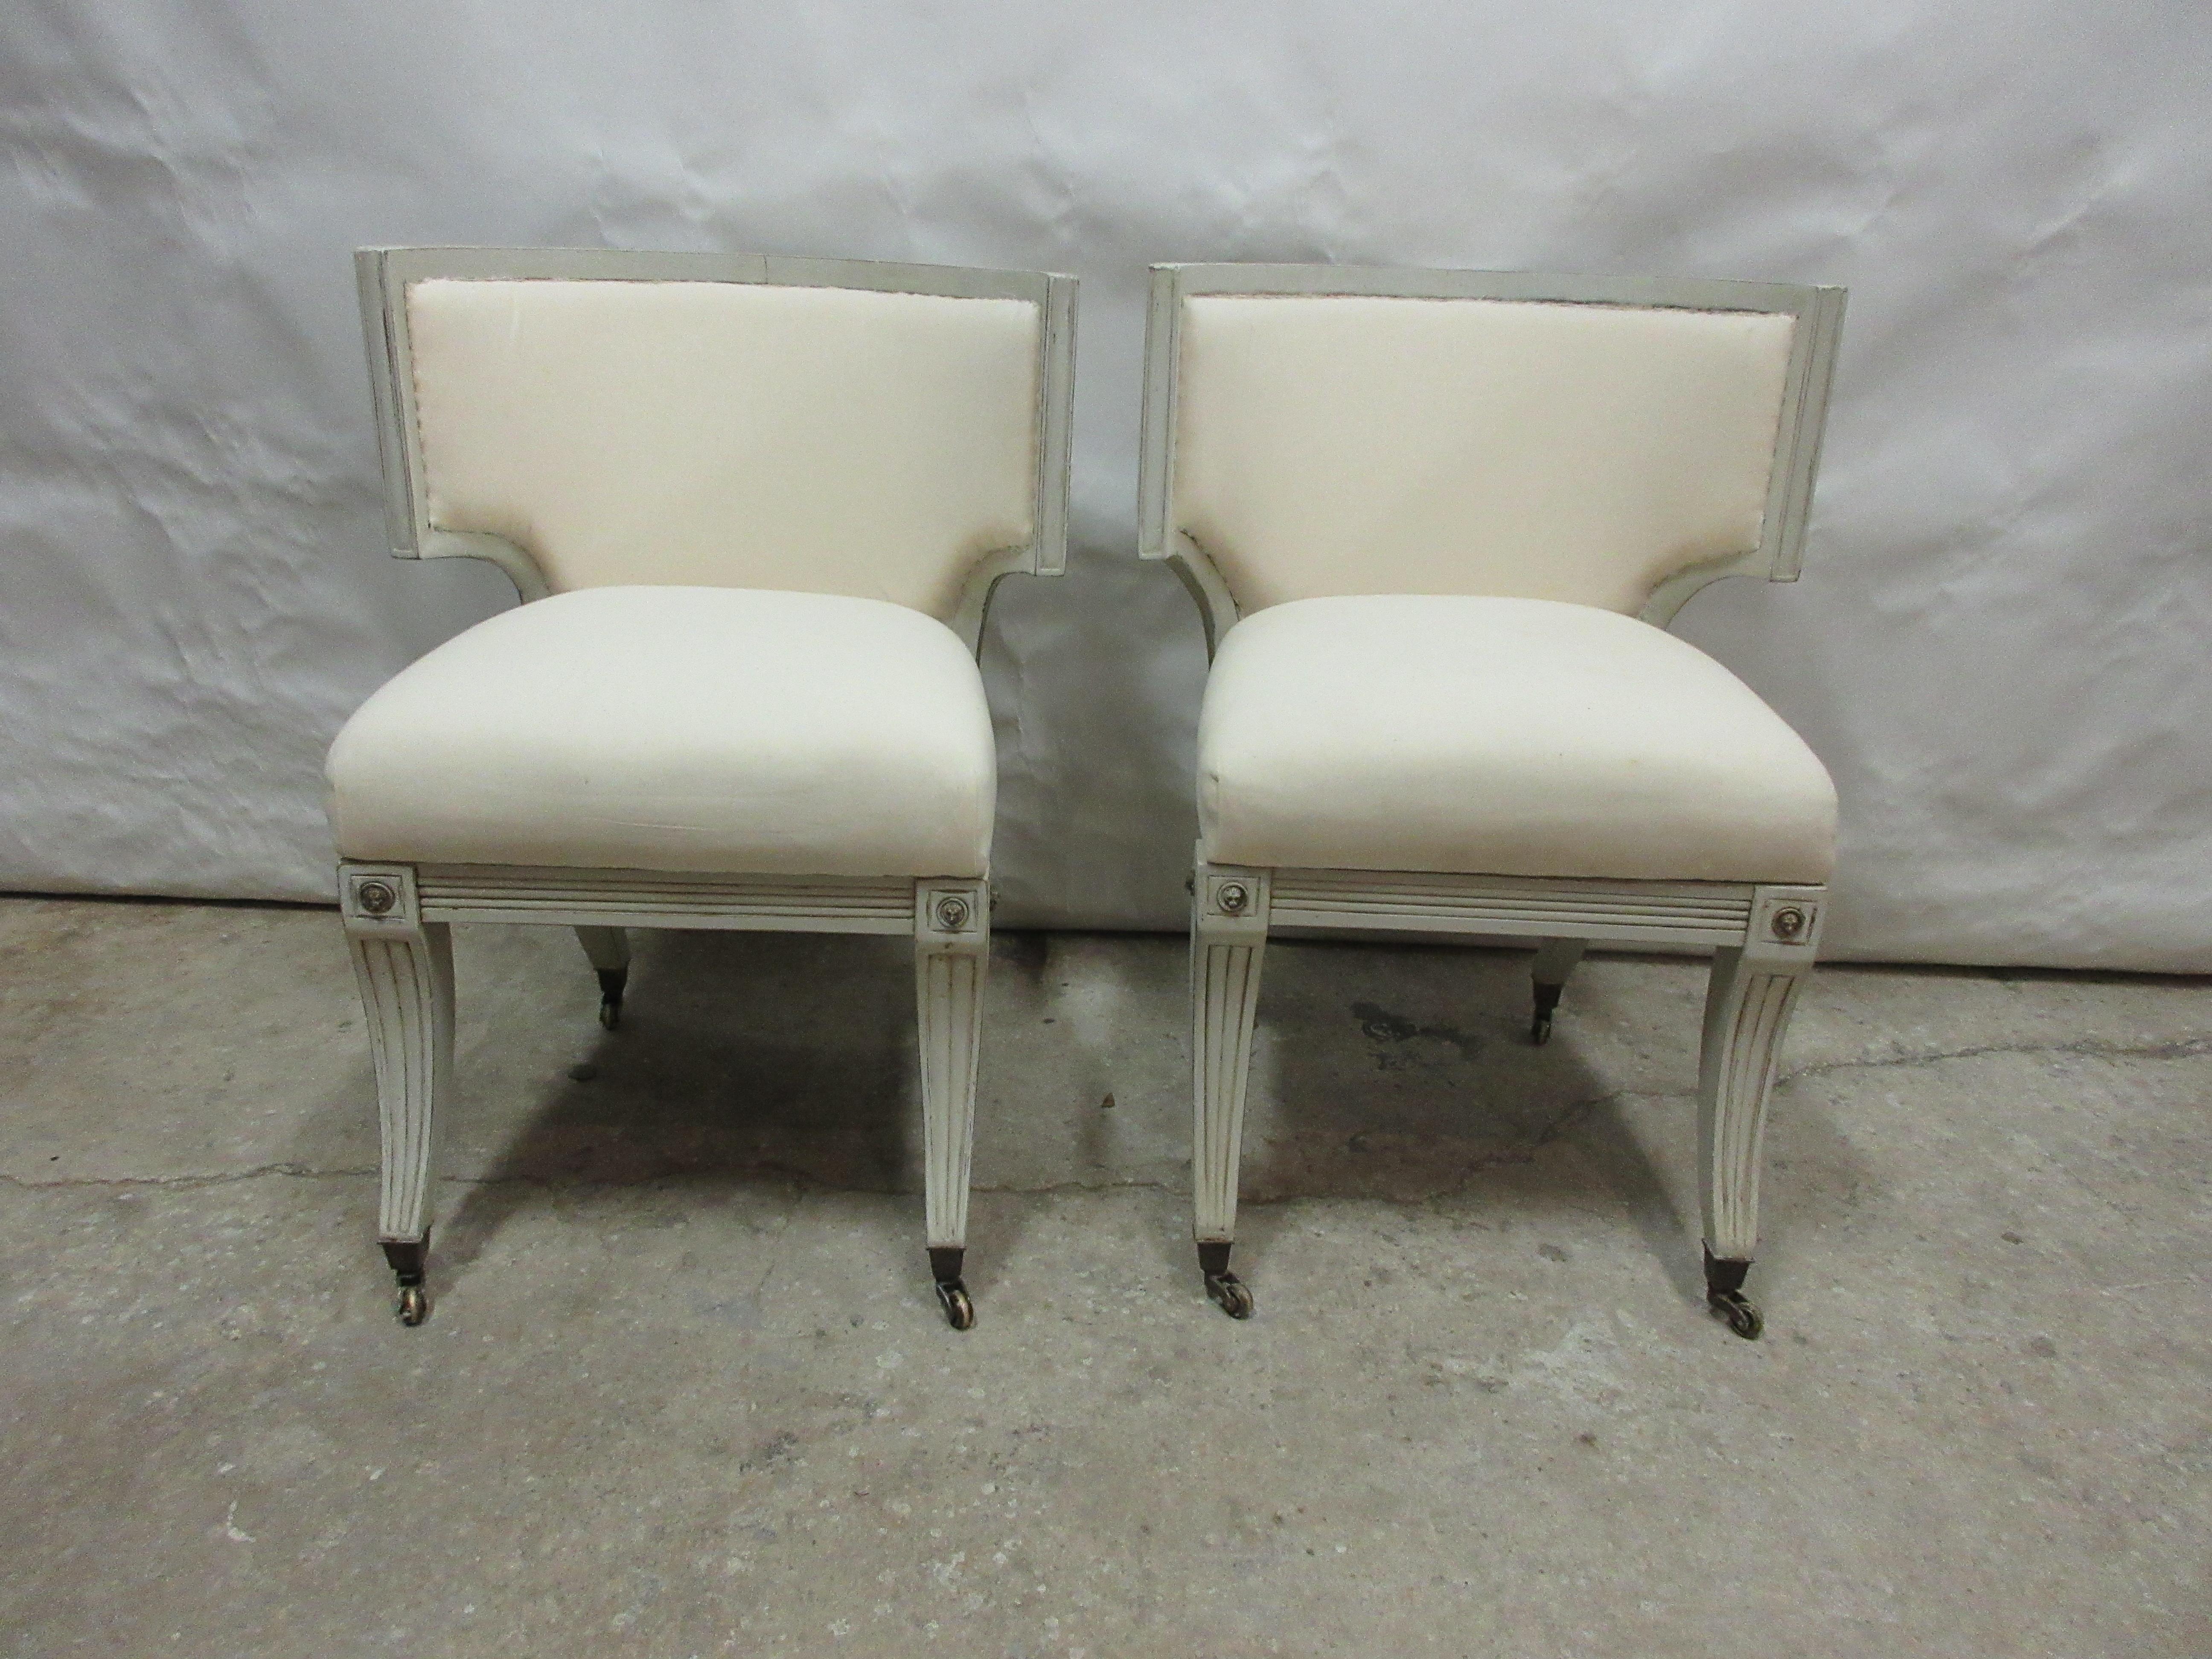 This is a Fabulous set of Swedish Kilsmos Style chairs, they have been restored and Repainted with Milk Paints 